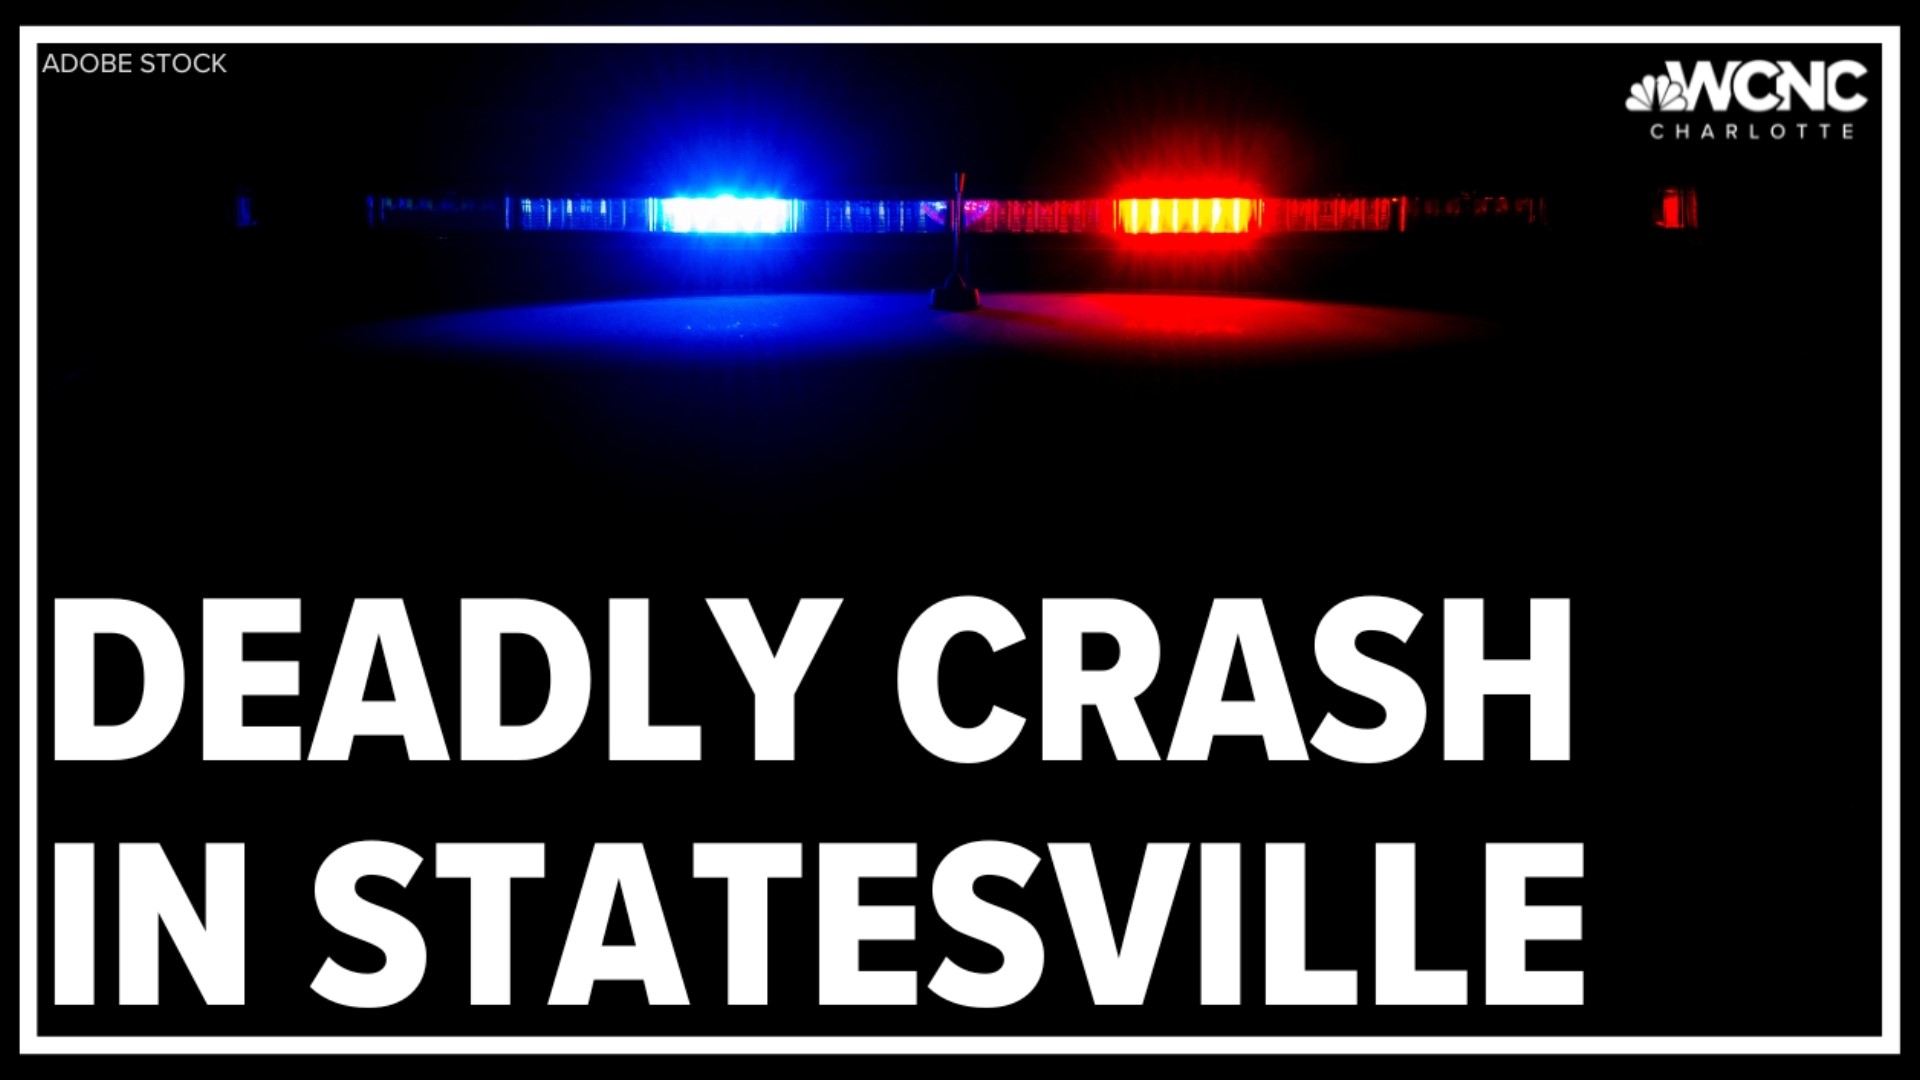 Statesville police need your help finding the driver they think is responsible for a head-on crash that killed one and seriously injured two others.